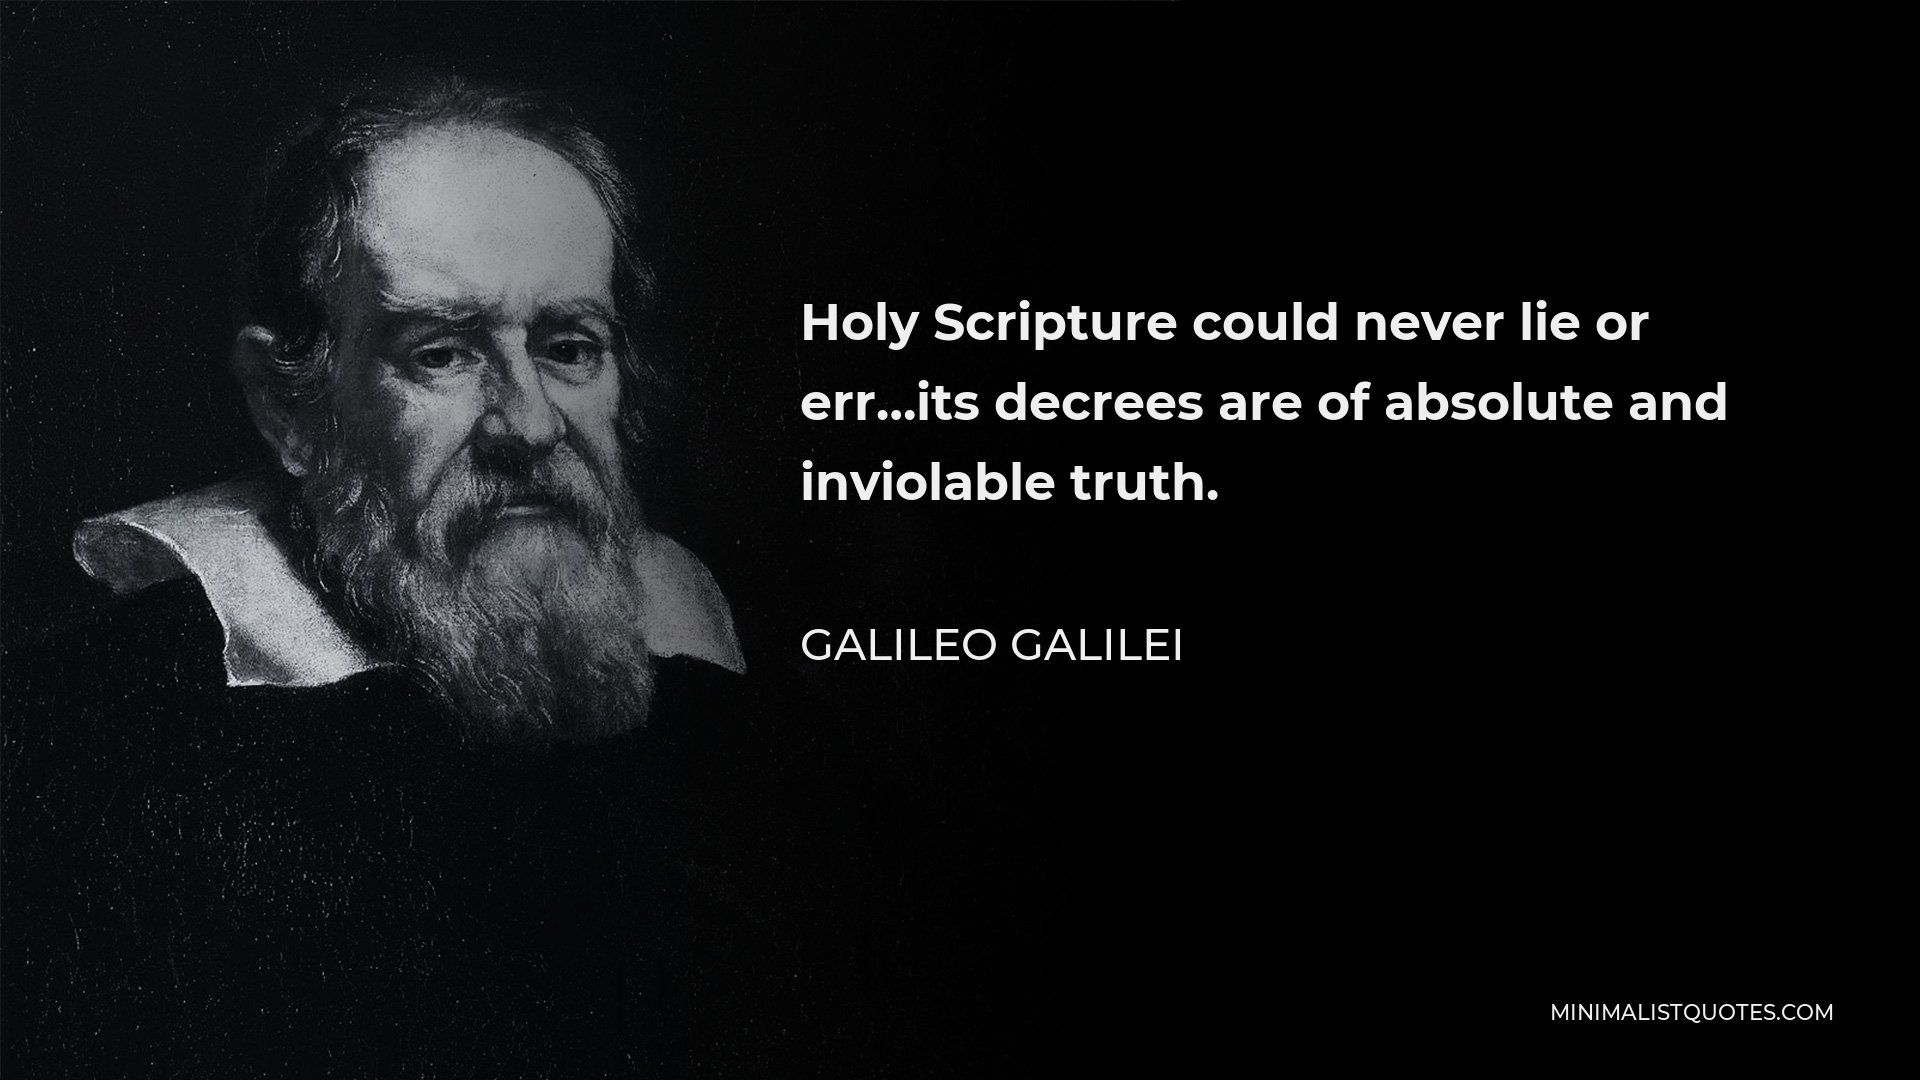 Galileo Galilei Quote - Holy Scripture could never lie or err…its decrees are of absolute and inviolable truth.